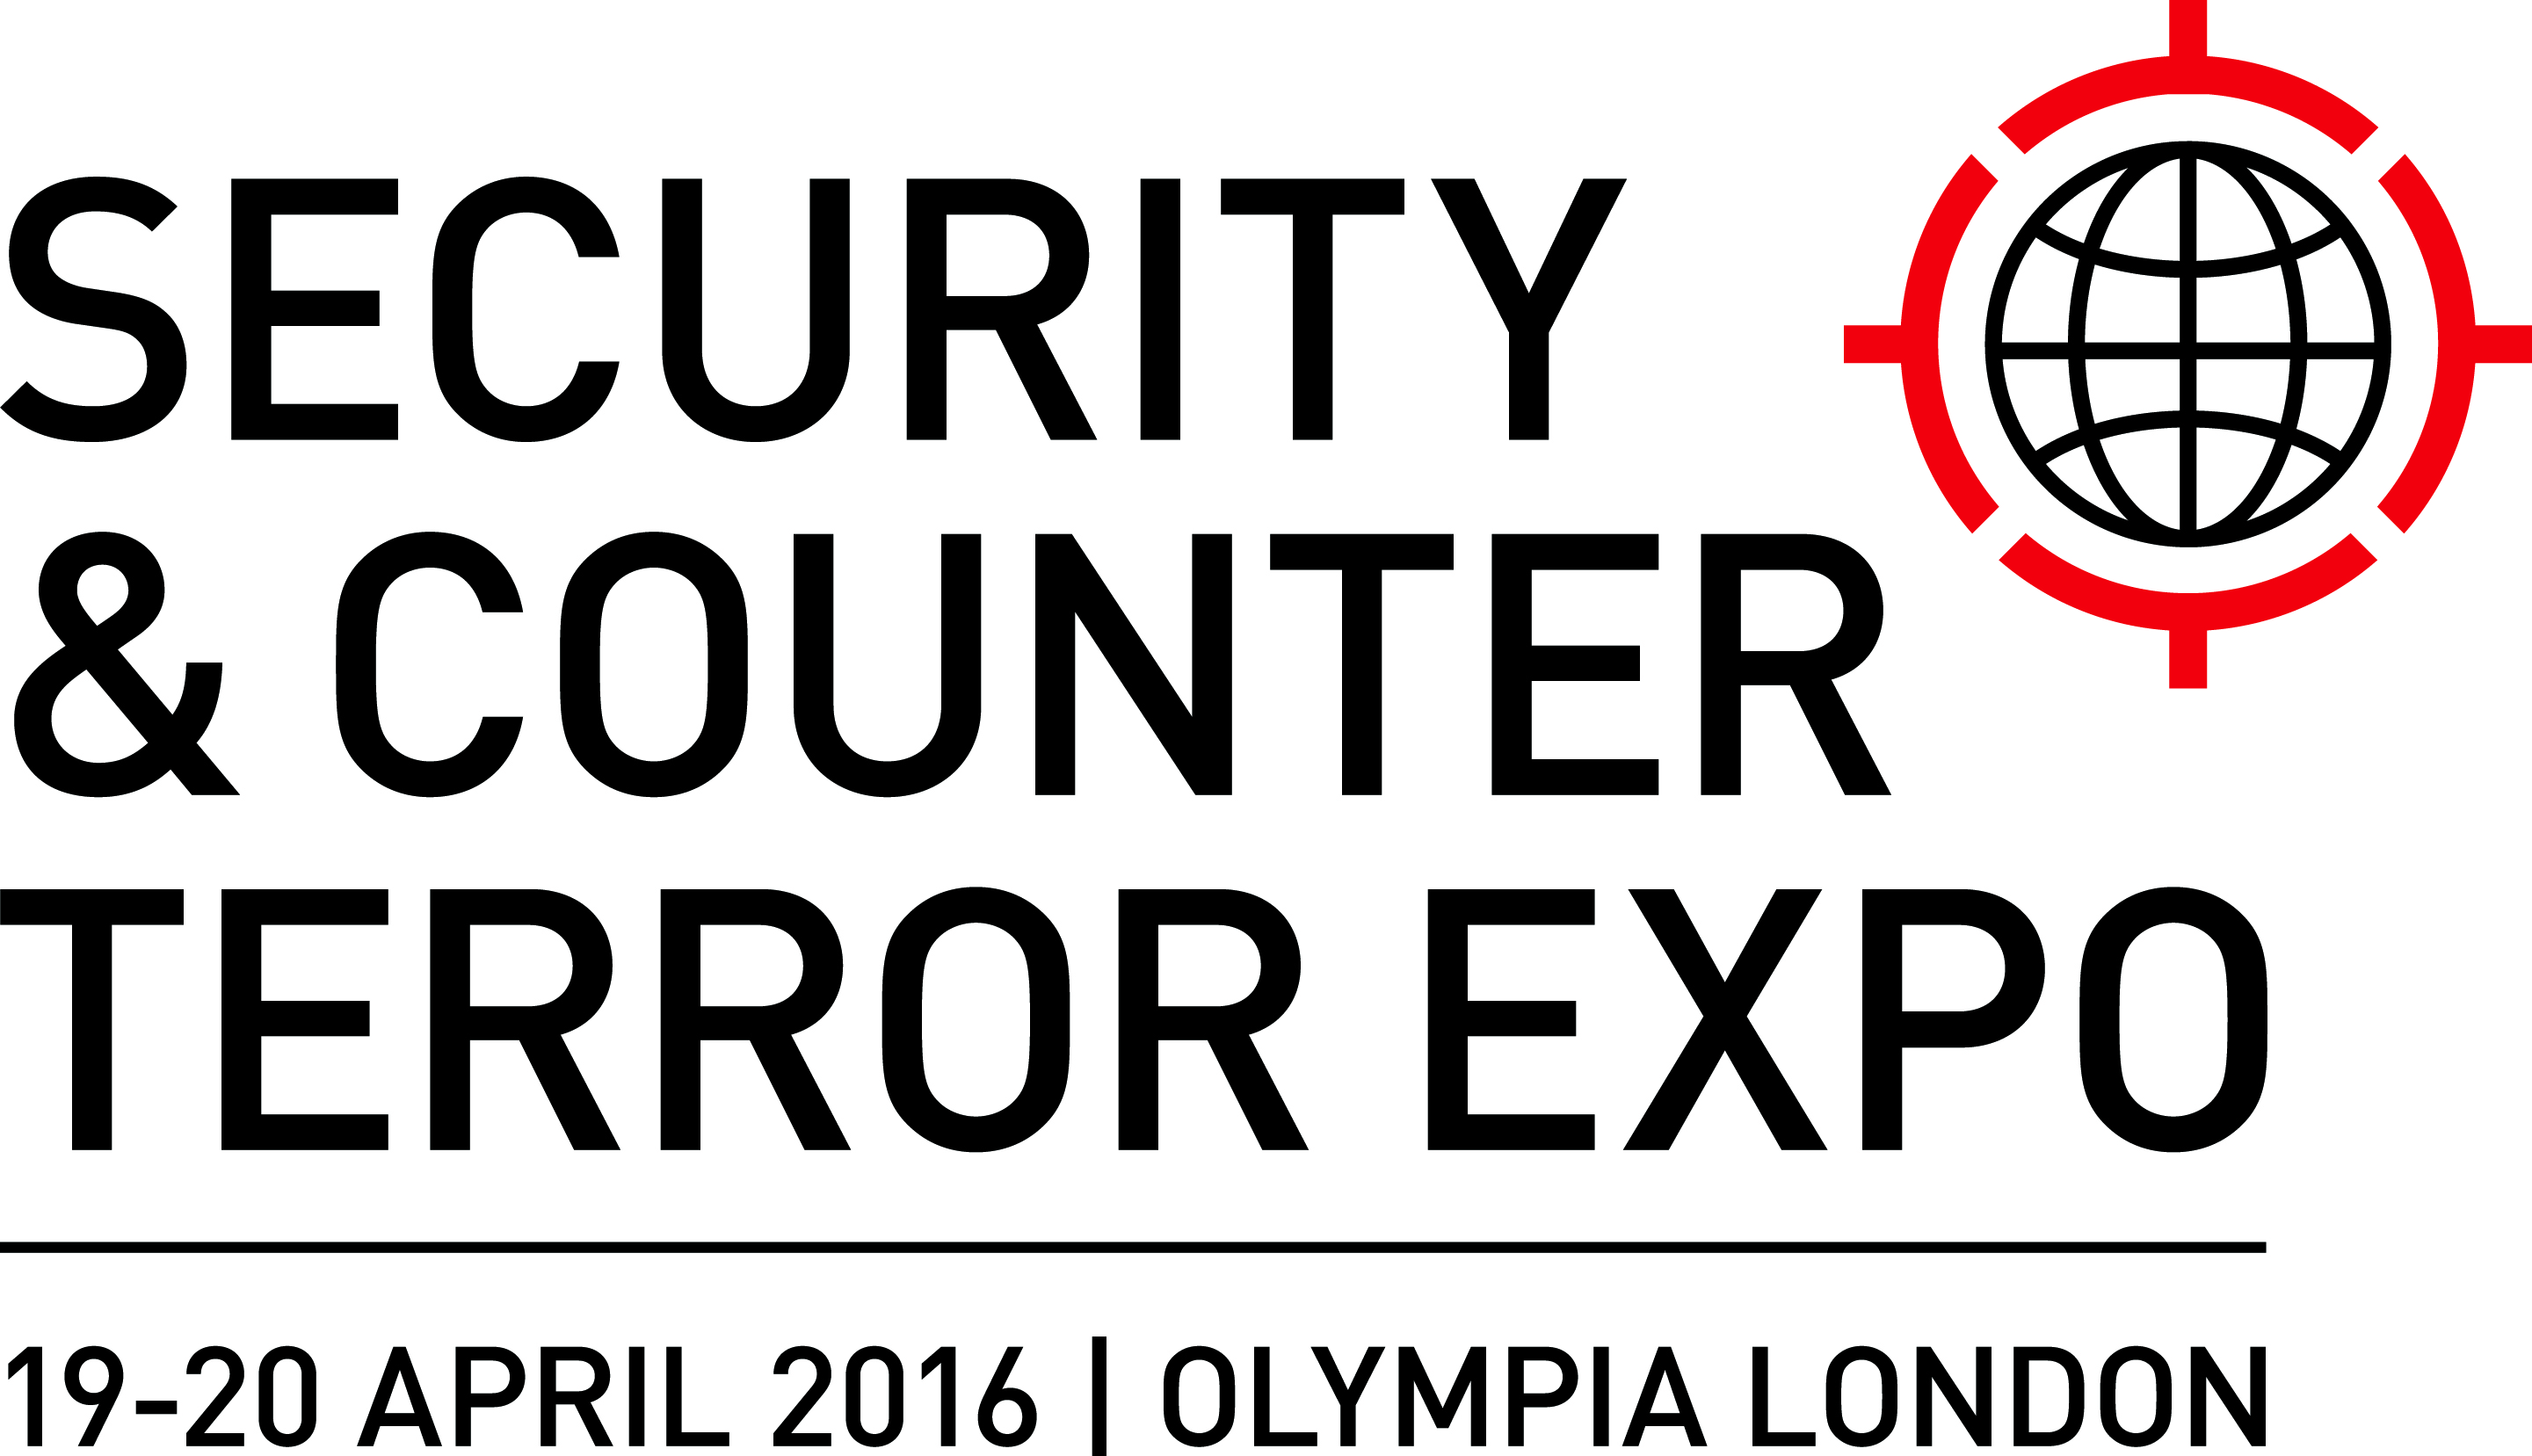 BAE Systems announces support of Security & Counter Terror Expo 2016